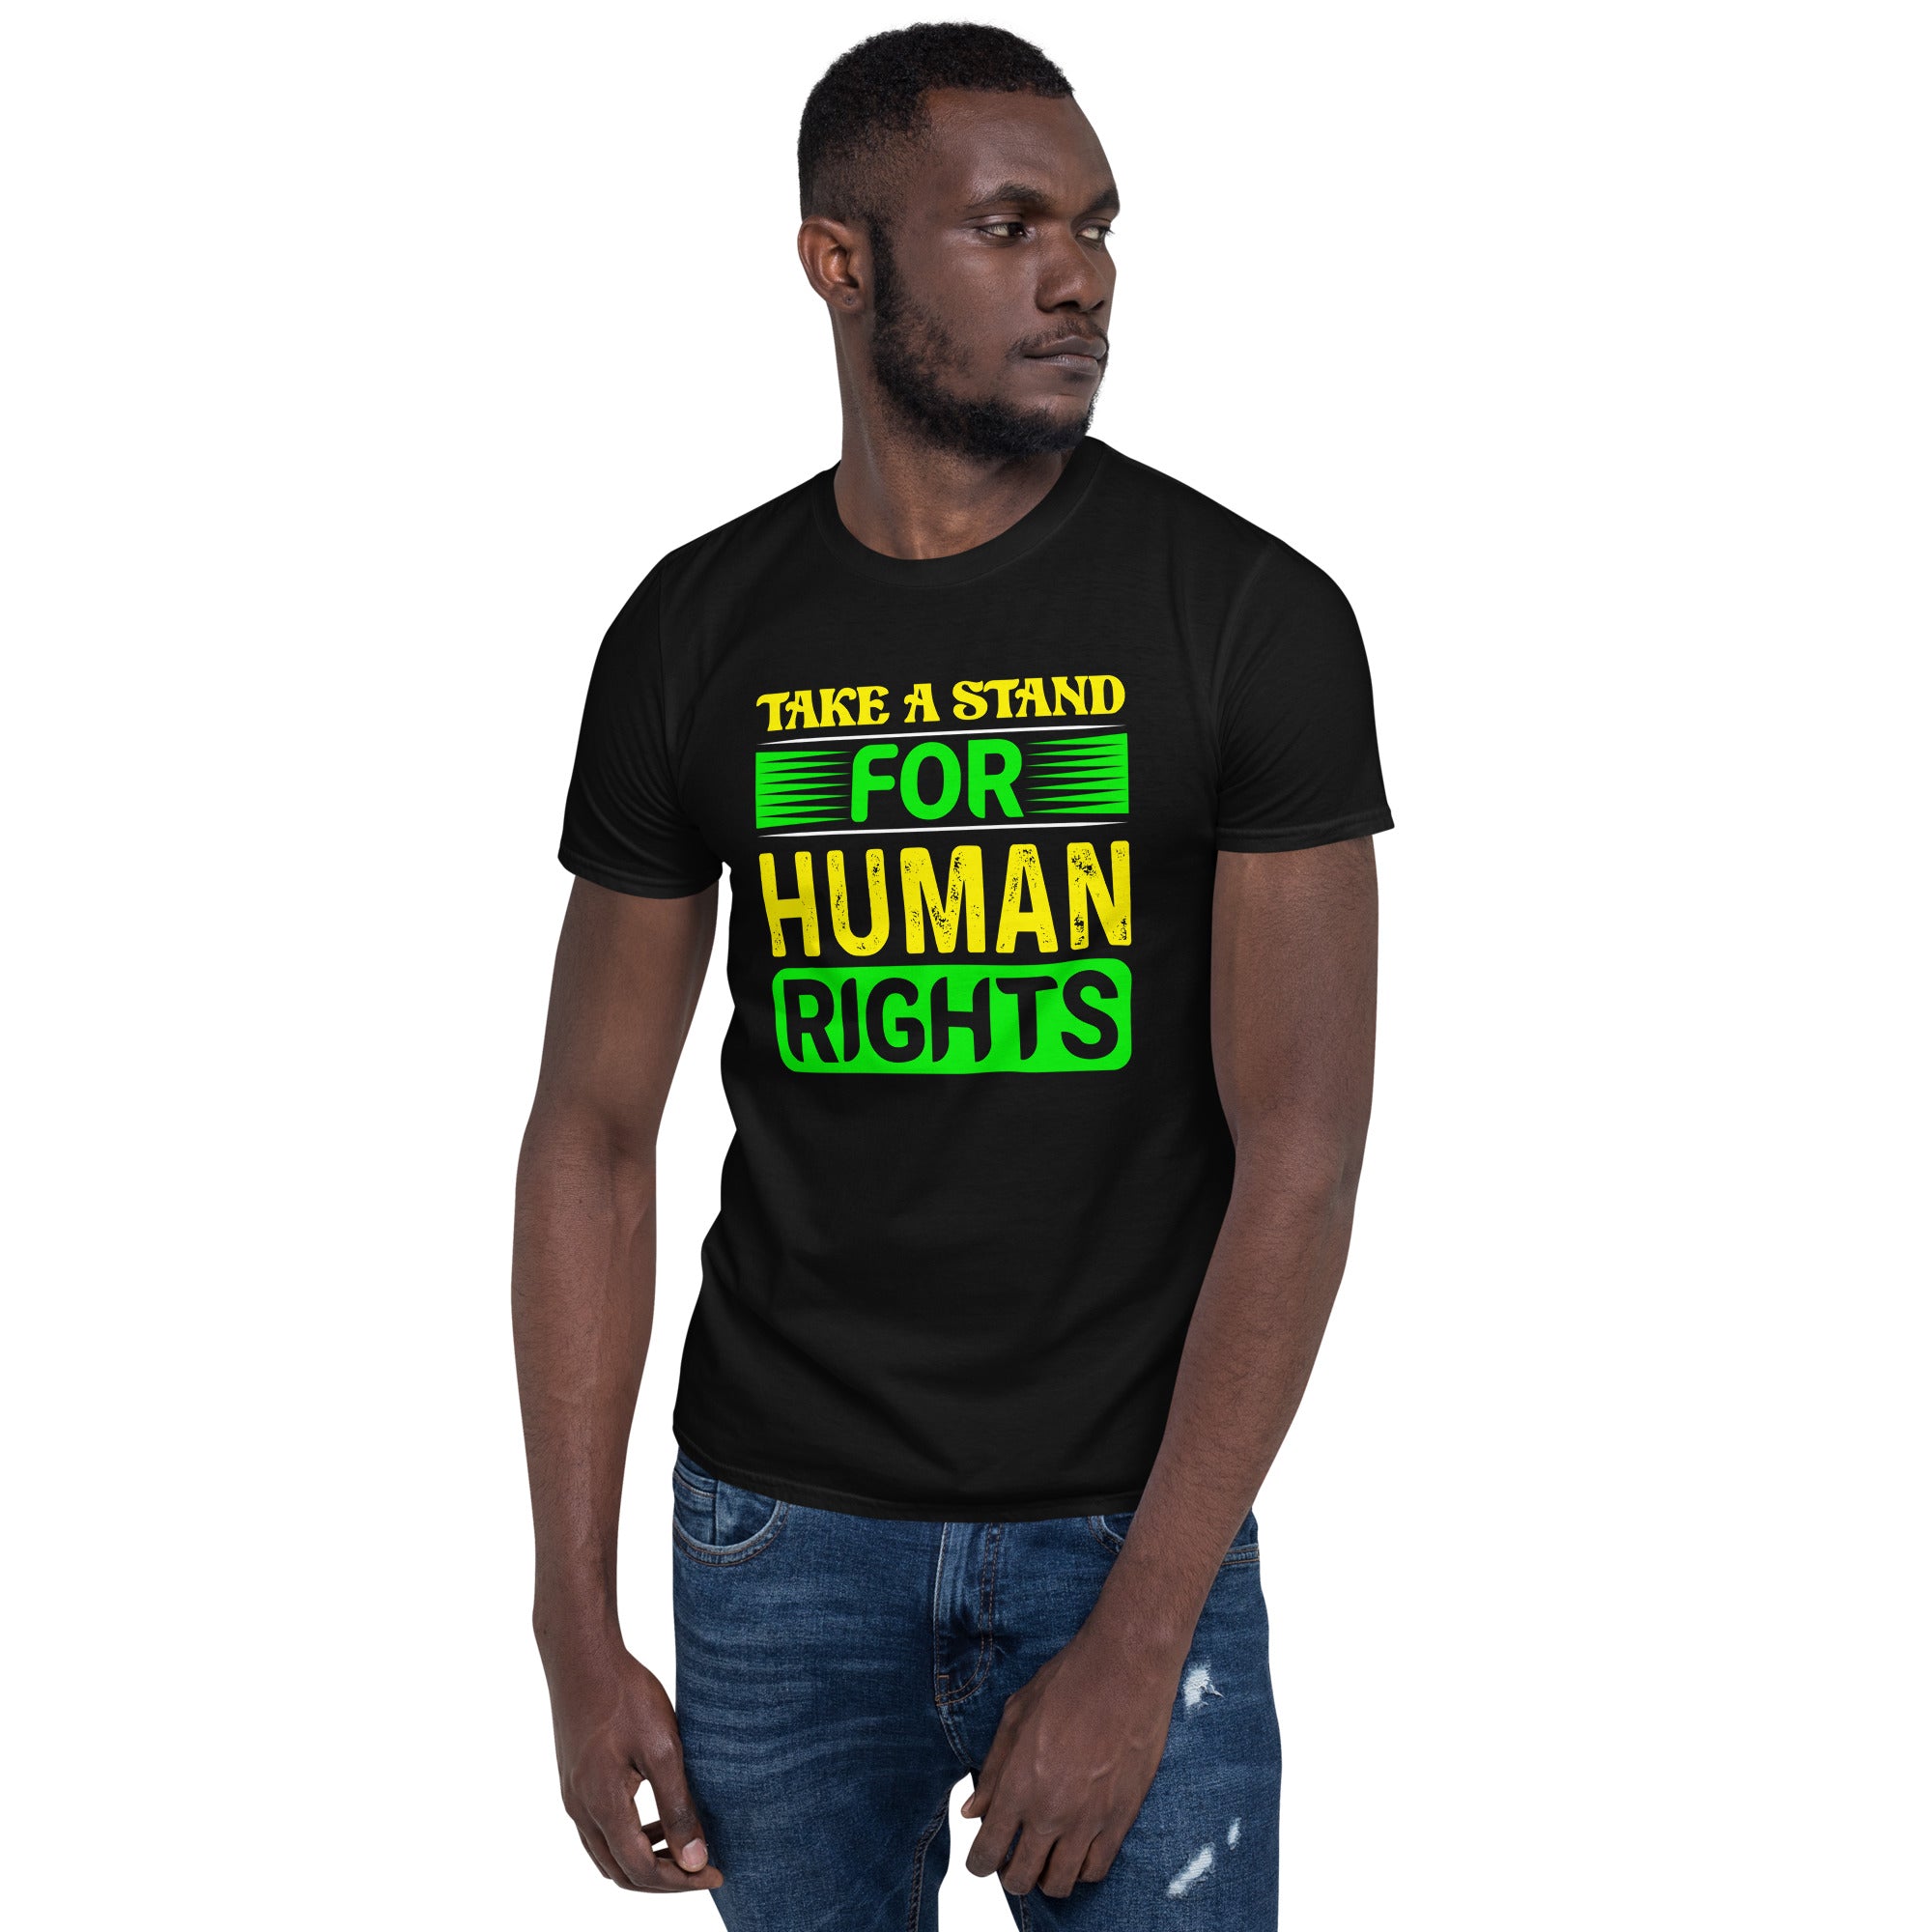 Take A Stand For Human Rights - Short-Sleeve Unisex T-Shirt